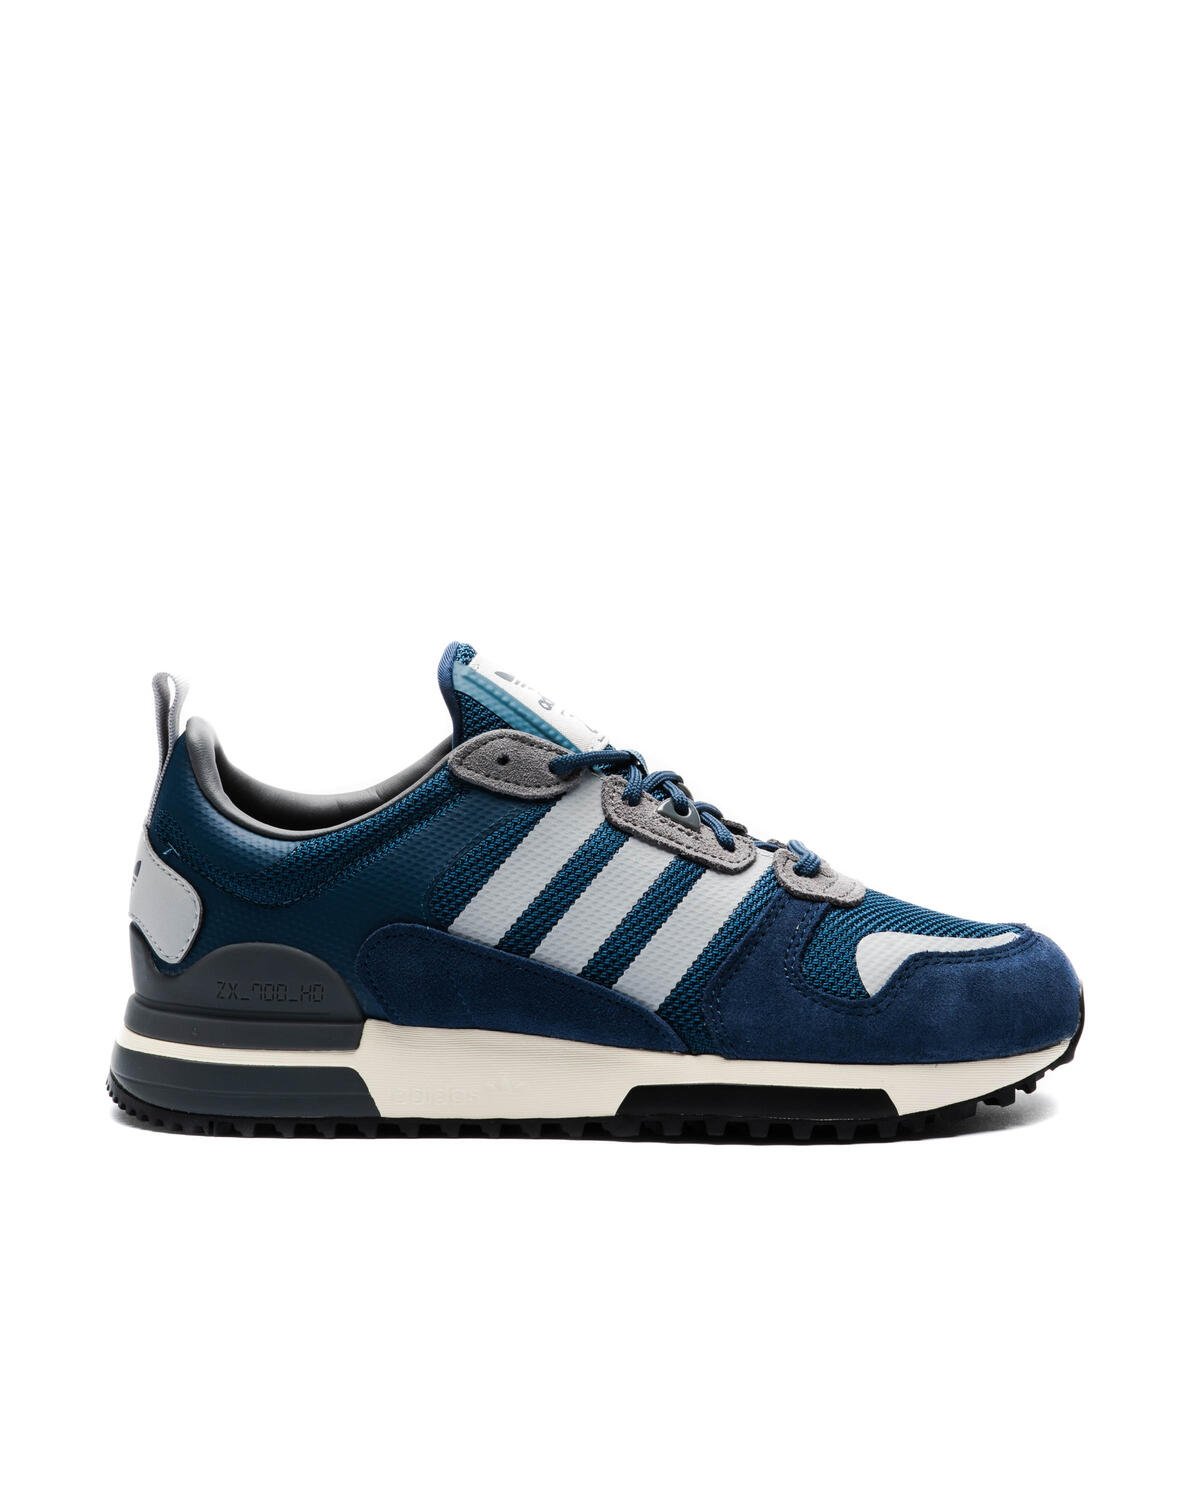 adidas running shoes zx